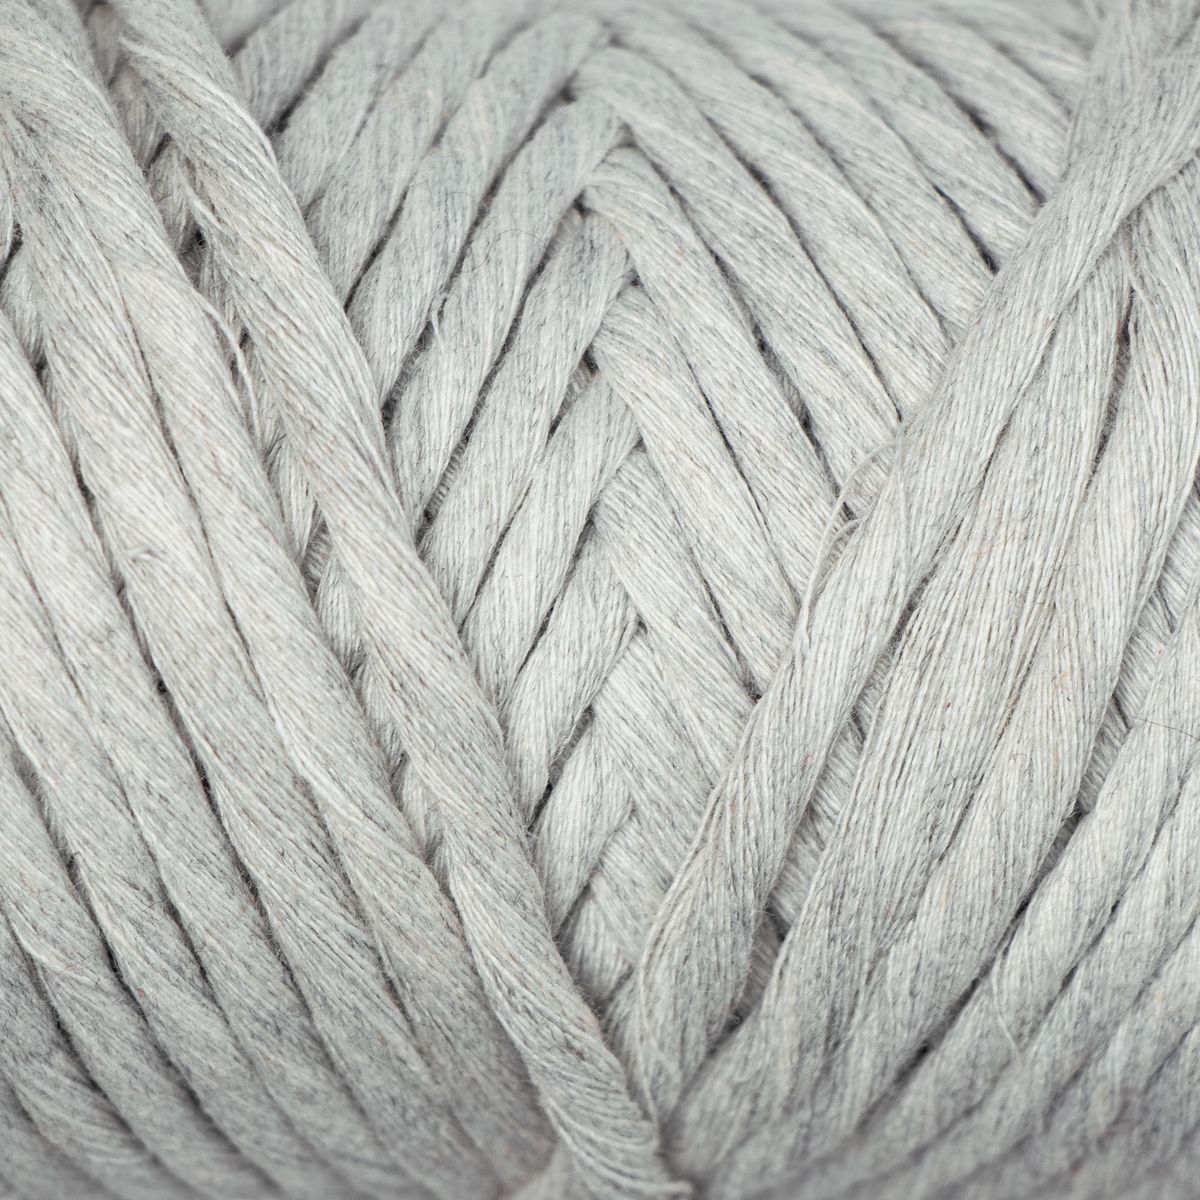 3 mm Recycled Cotton String 200gr / 7oz Light Heather Grey